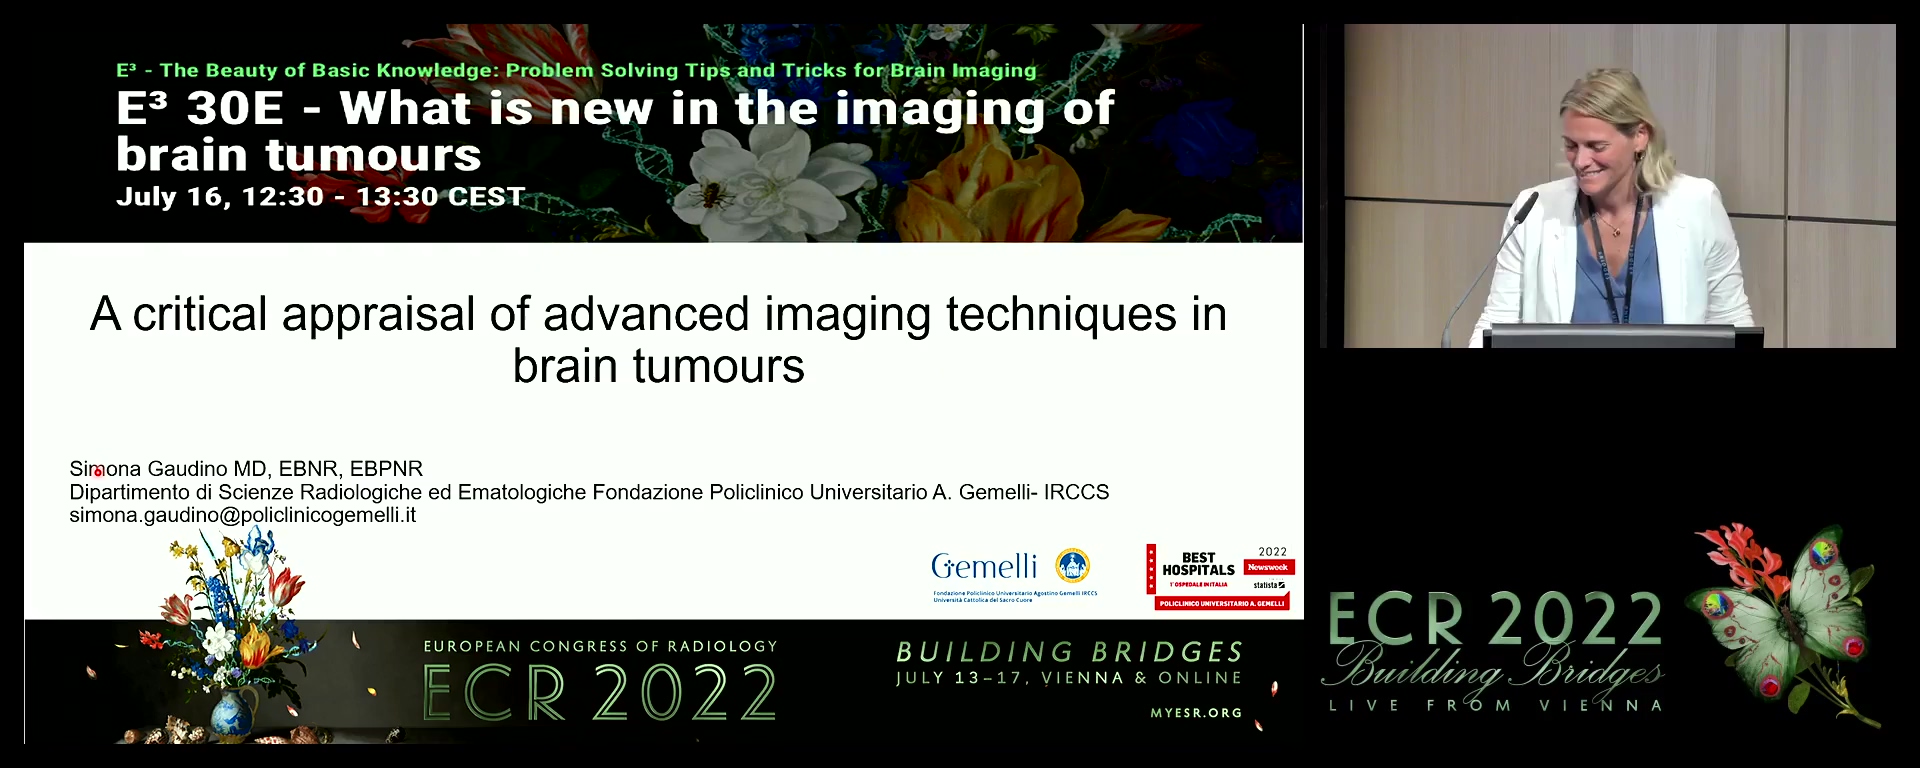 A critical appraisal of advanced imaging techniques in brain tumours